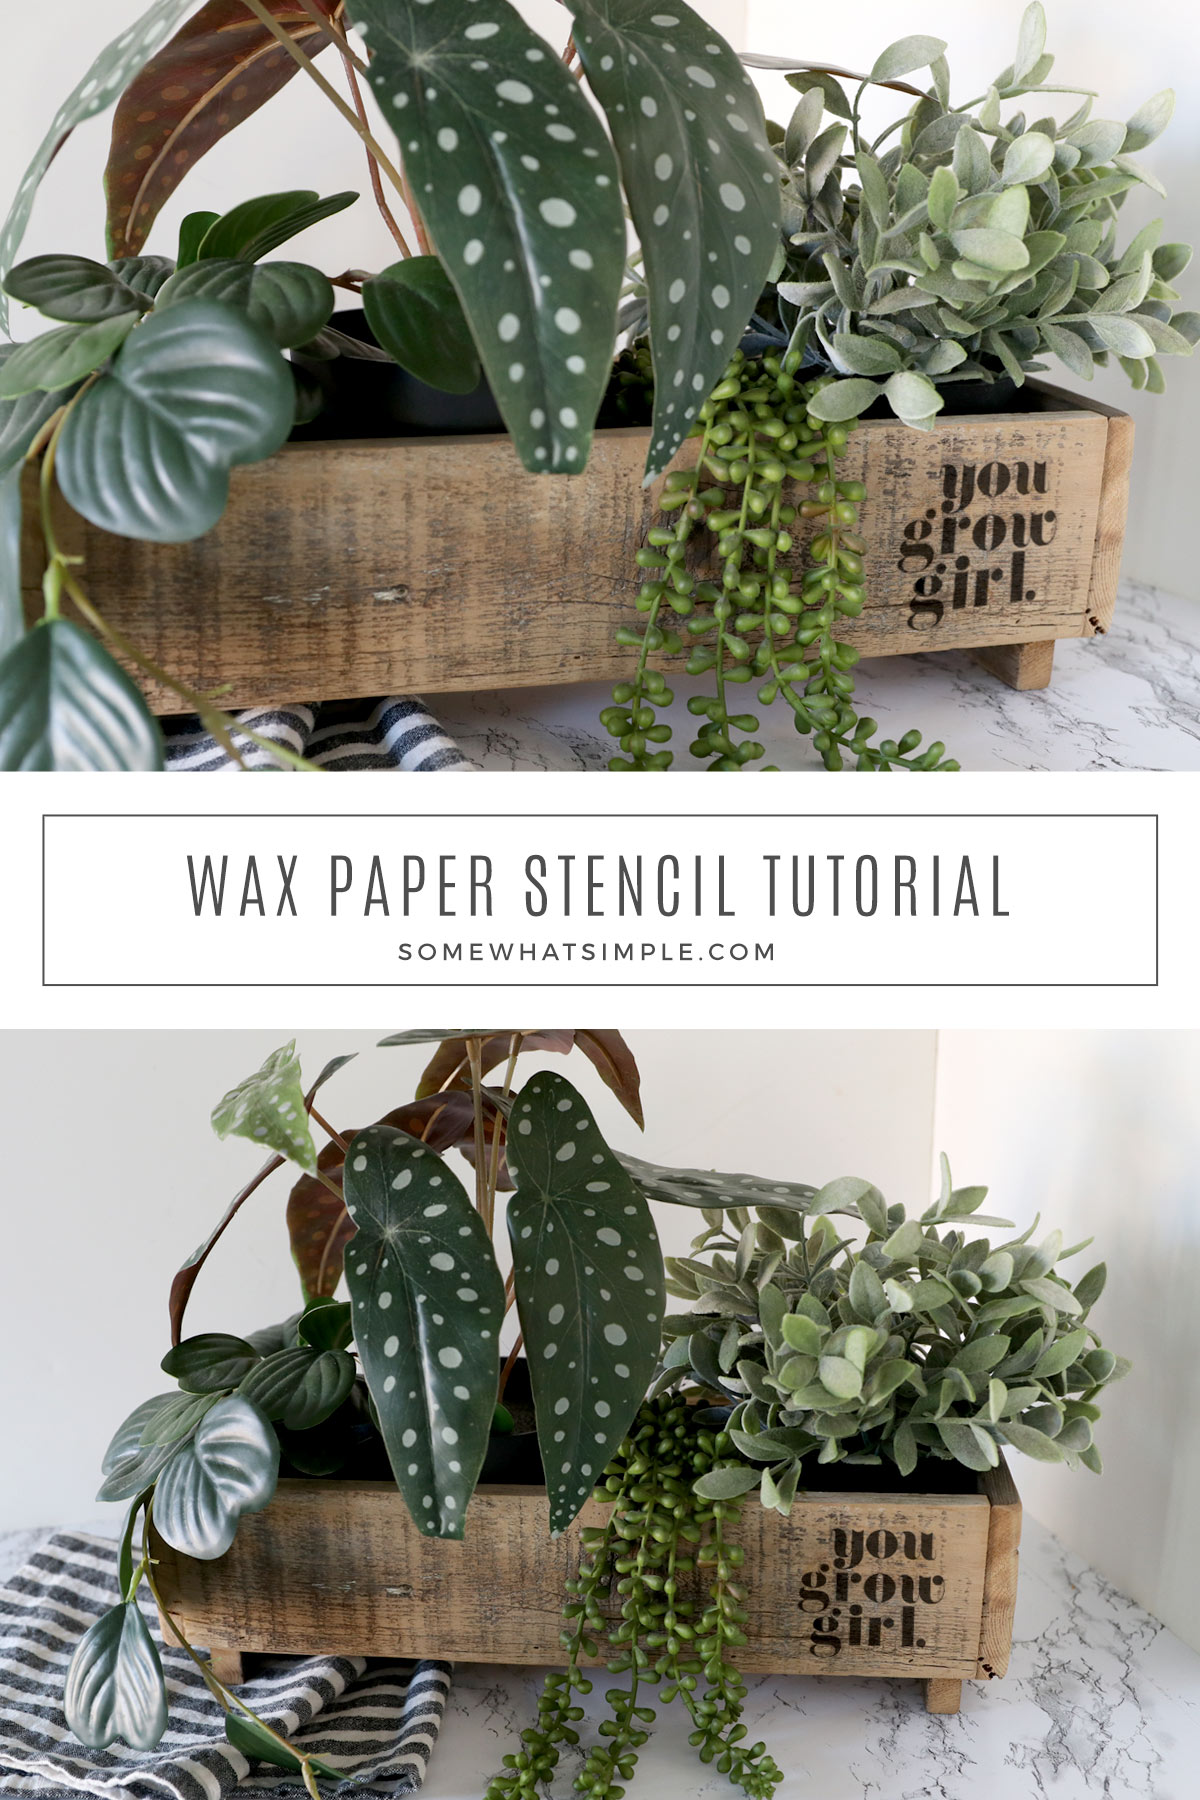 How to Make a Wax Paper Stencil - from Somewhat Simple